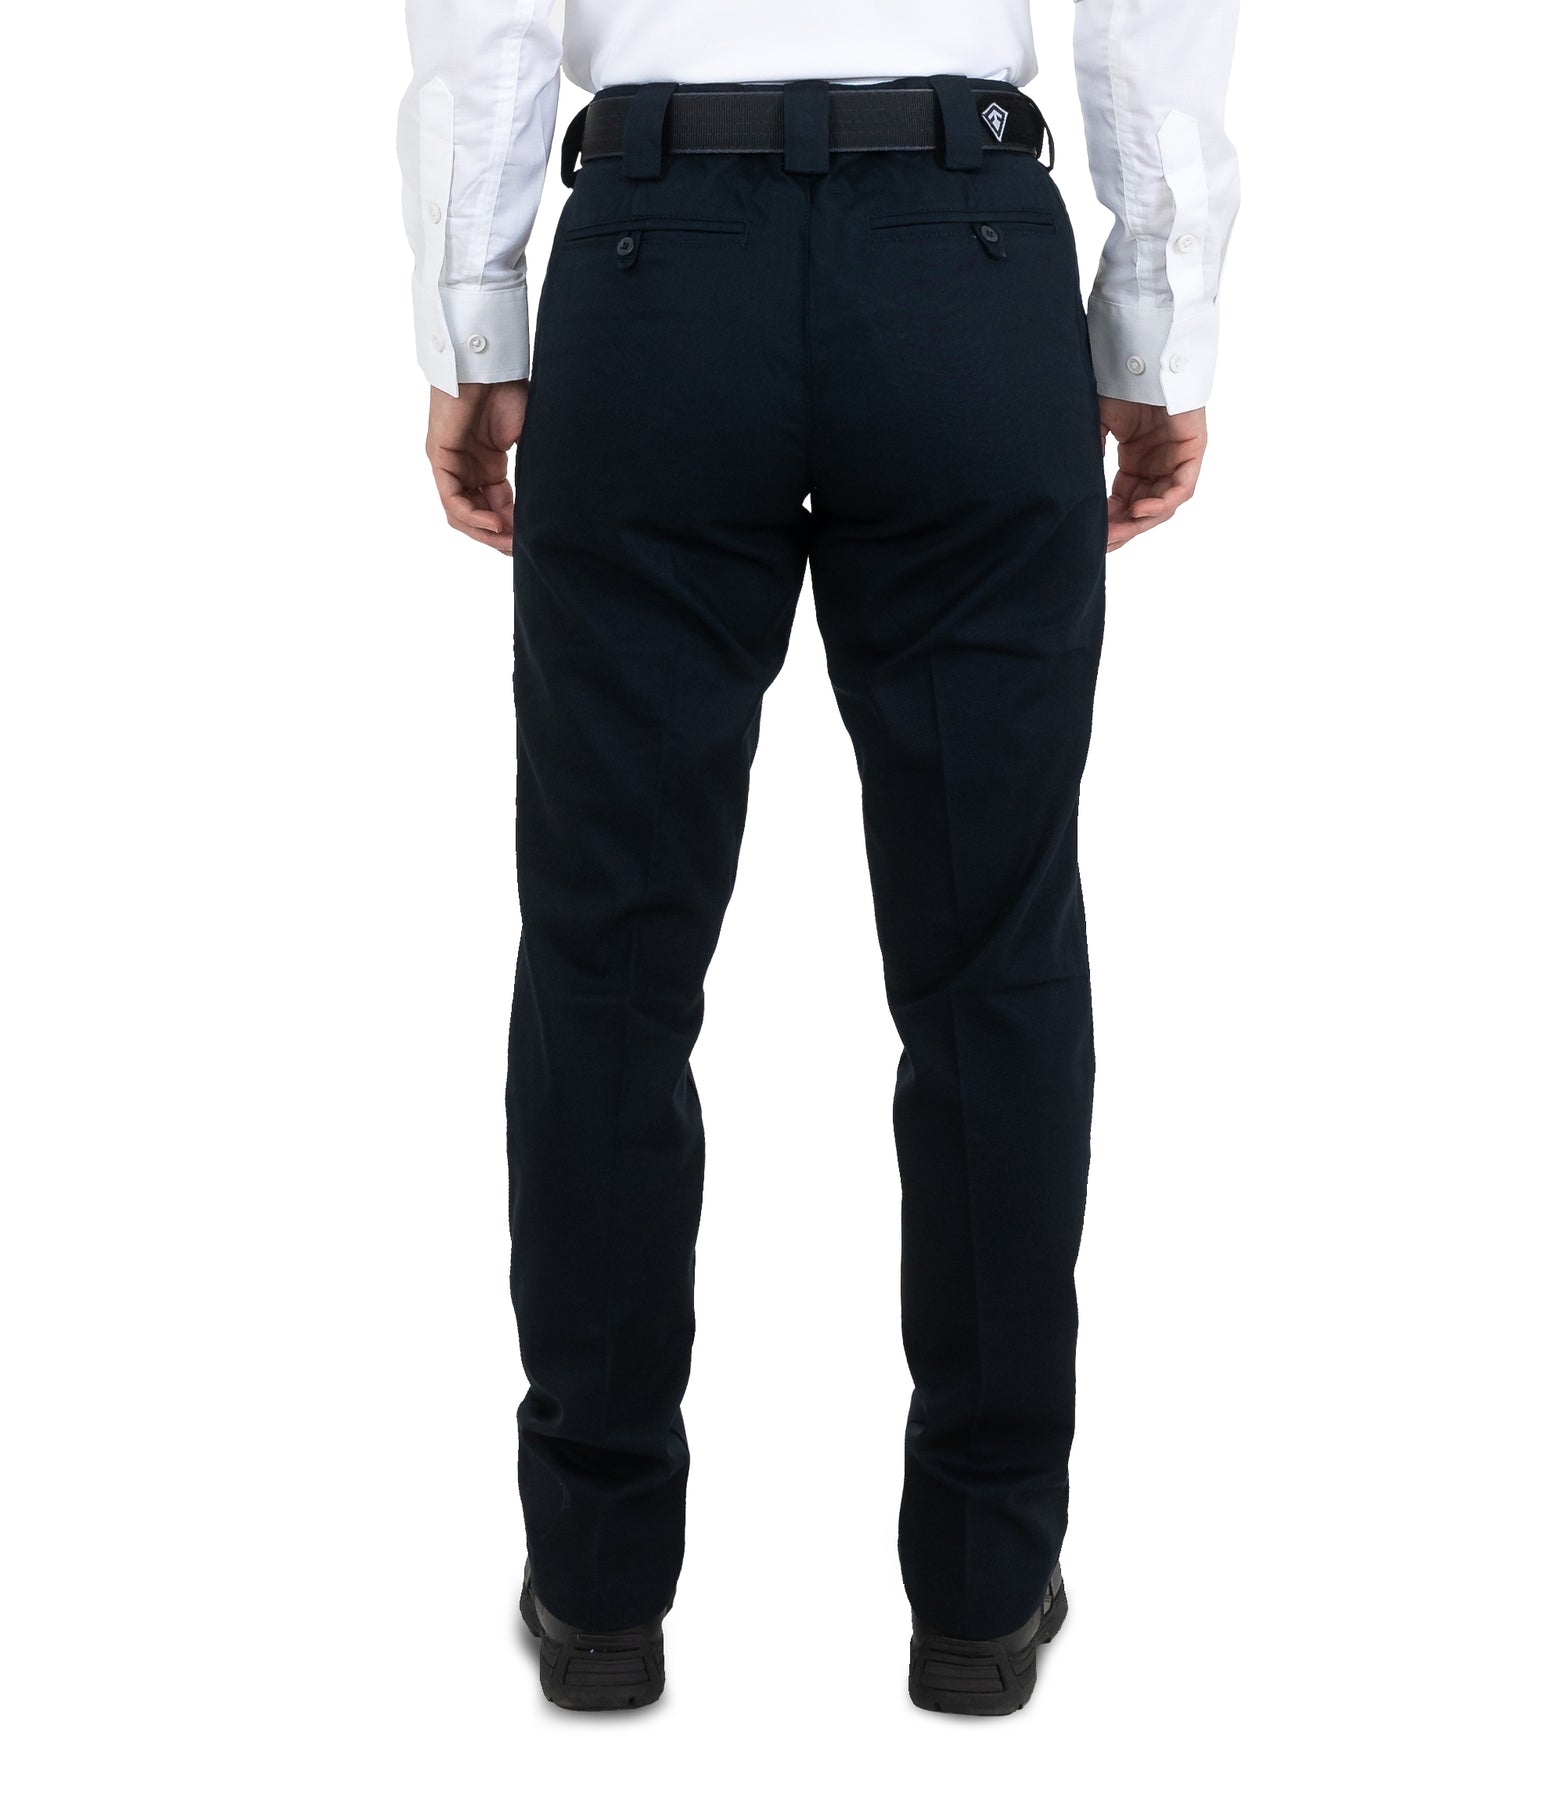 Women's Cotton Station Pant – First Tactical